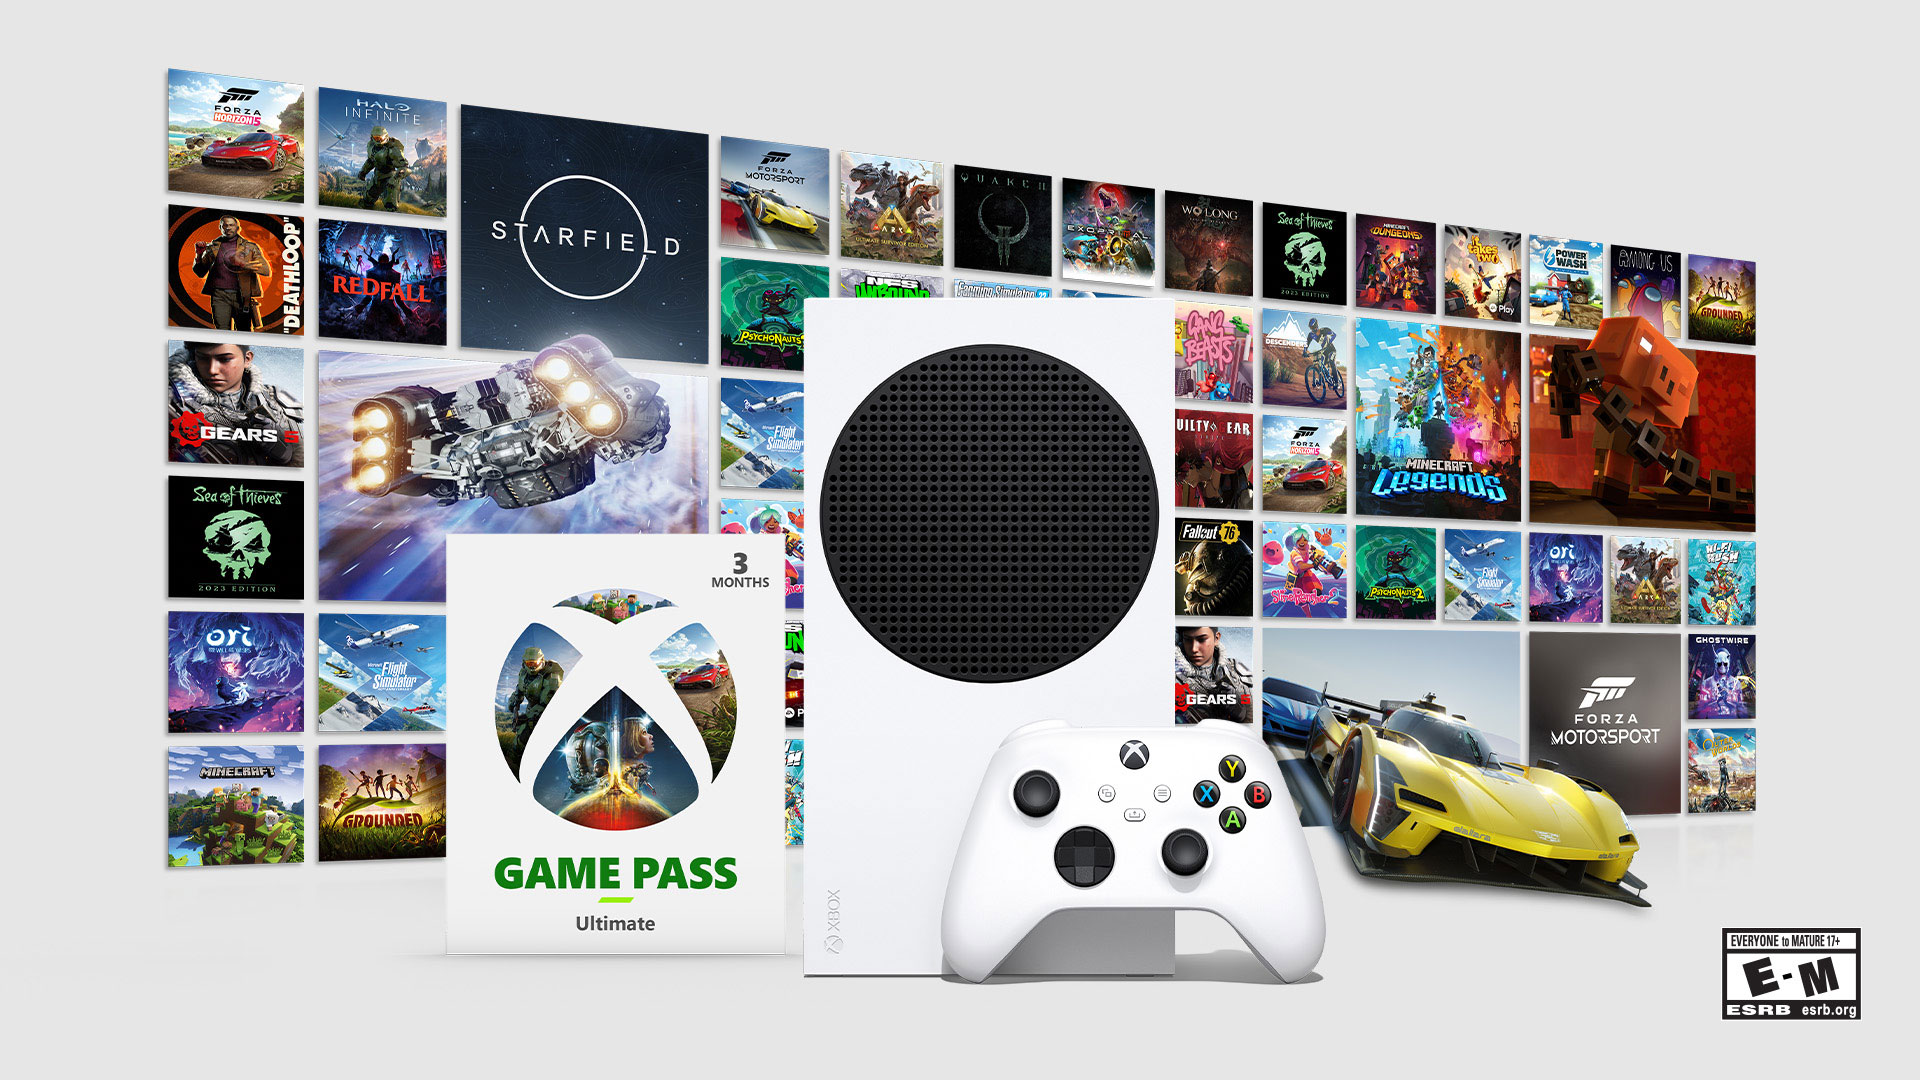 The new Xbox Series S Starter Bundle arrives October 31